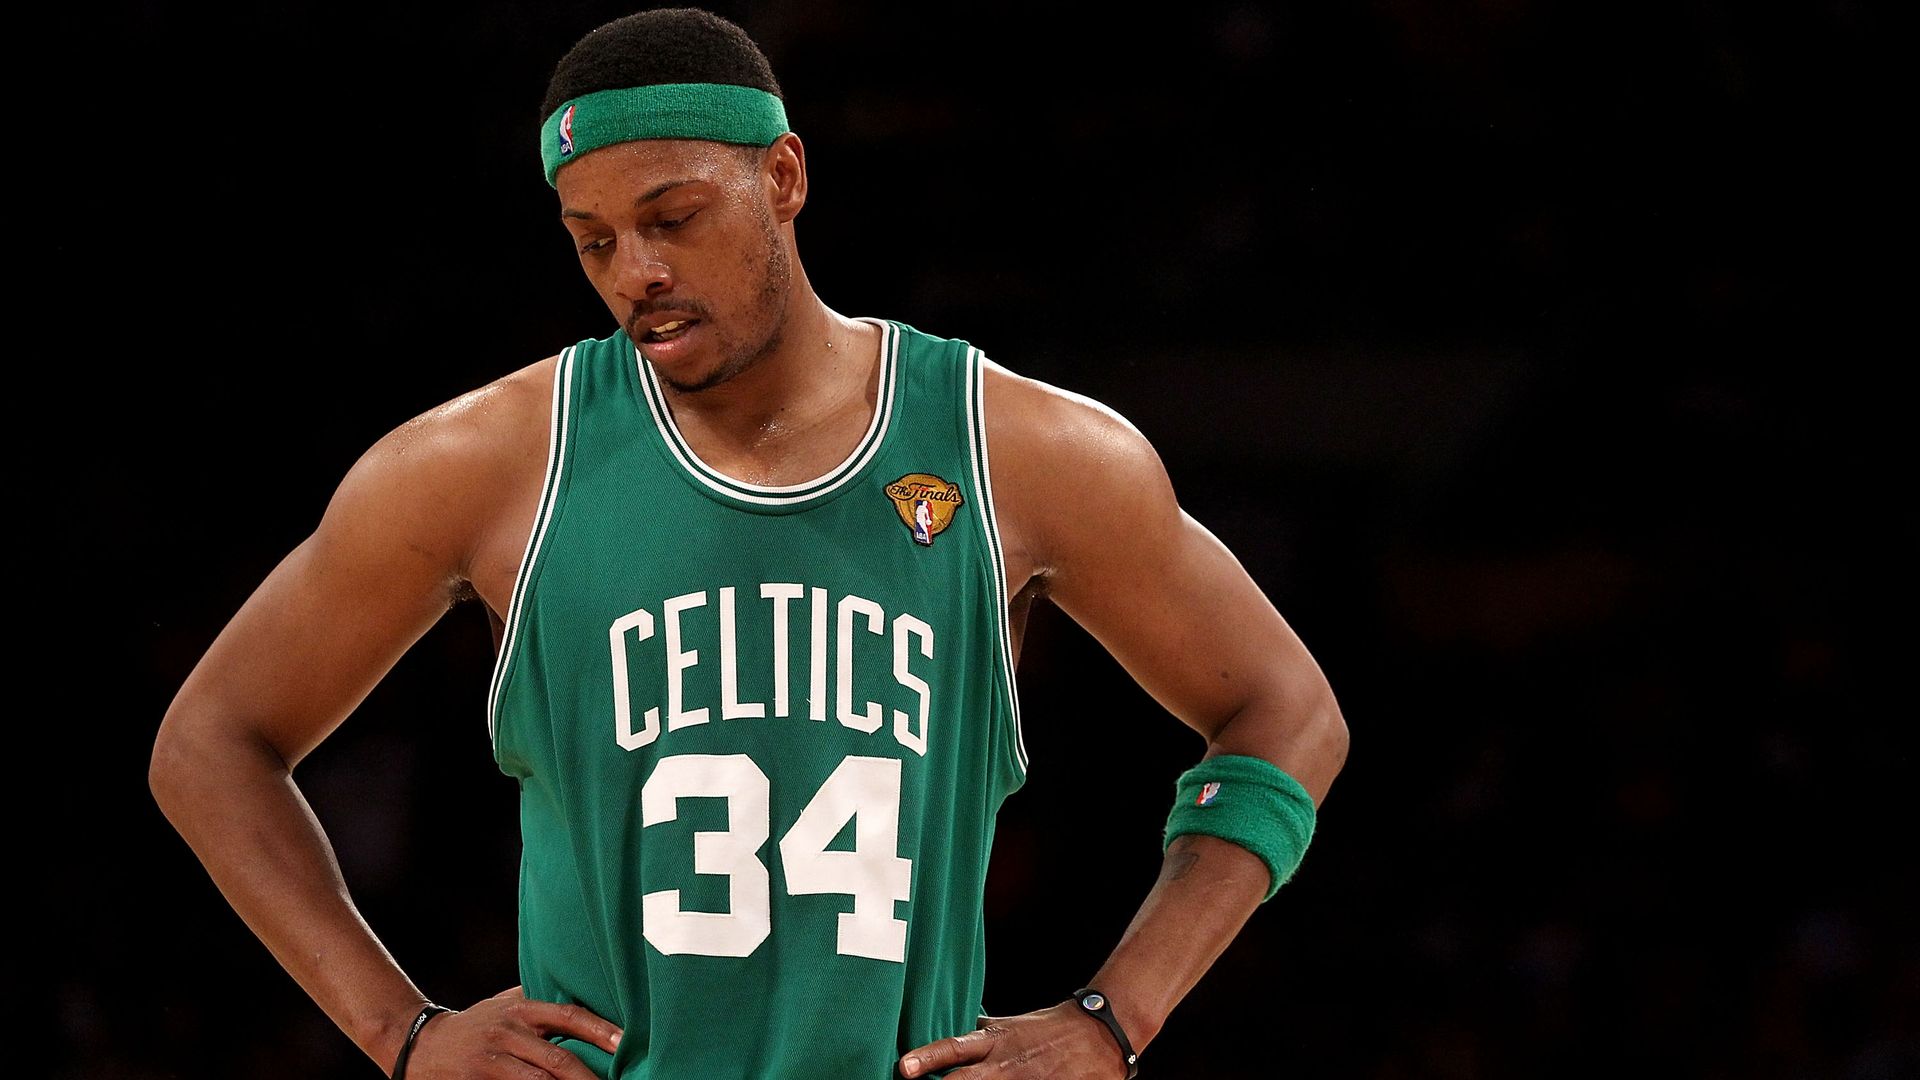 Paul Pierce pays $1.4 million to settle crypto charges